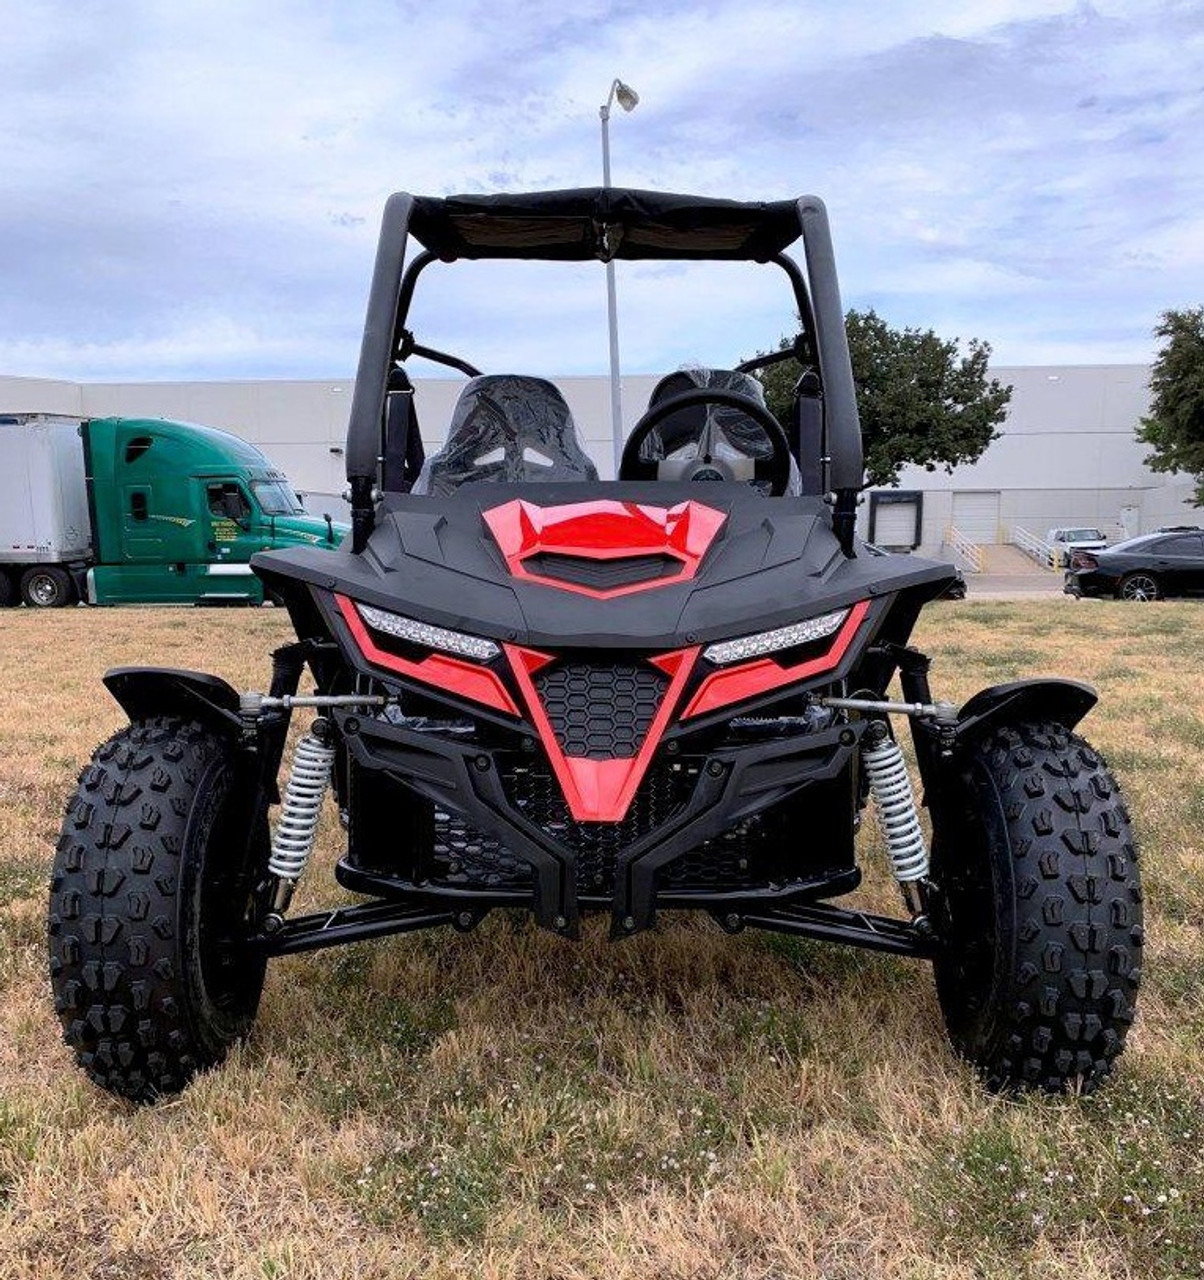 Trailmaster Cheetah 200 Go kart, Upgraded rear end, high back seats, Full Welded Roll Cage - Red Front Side view